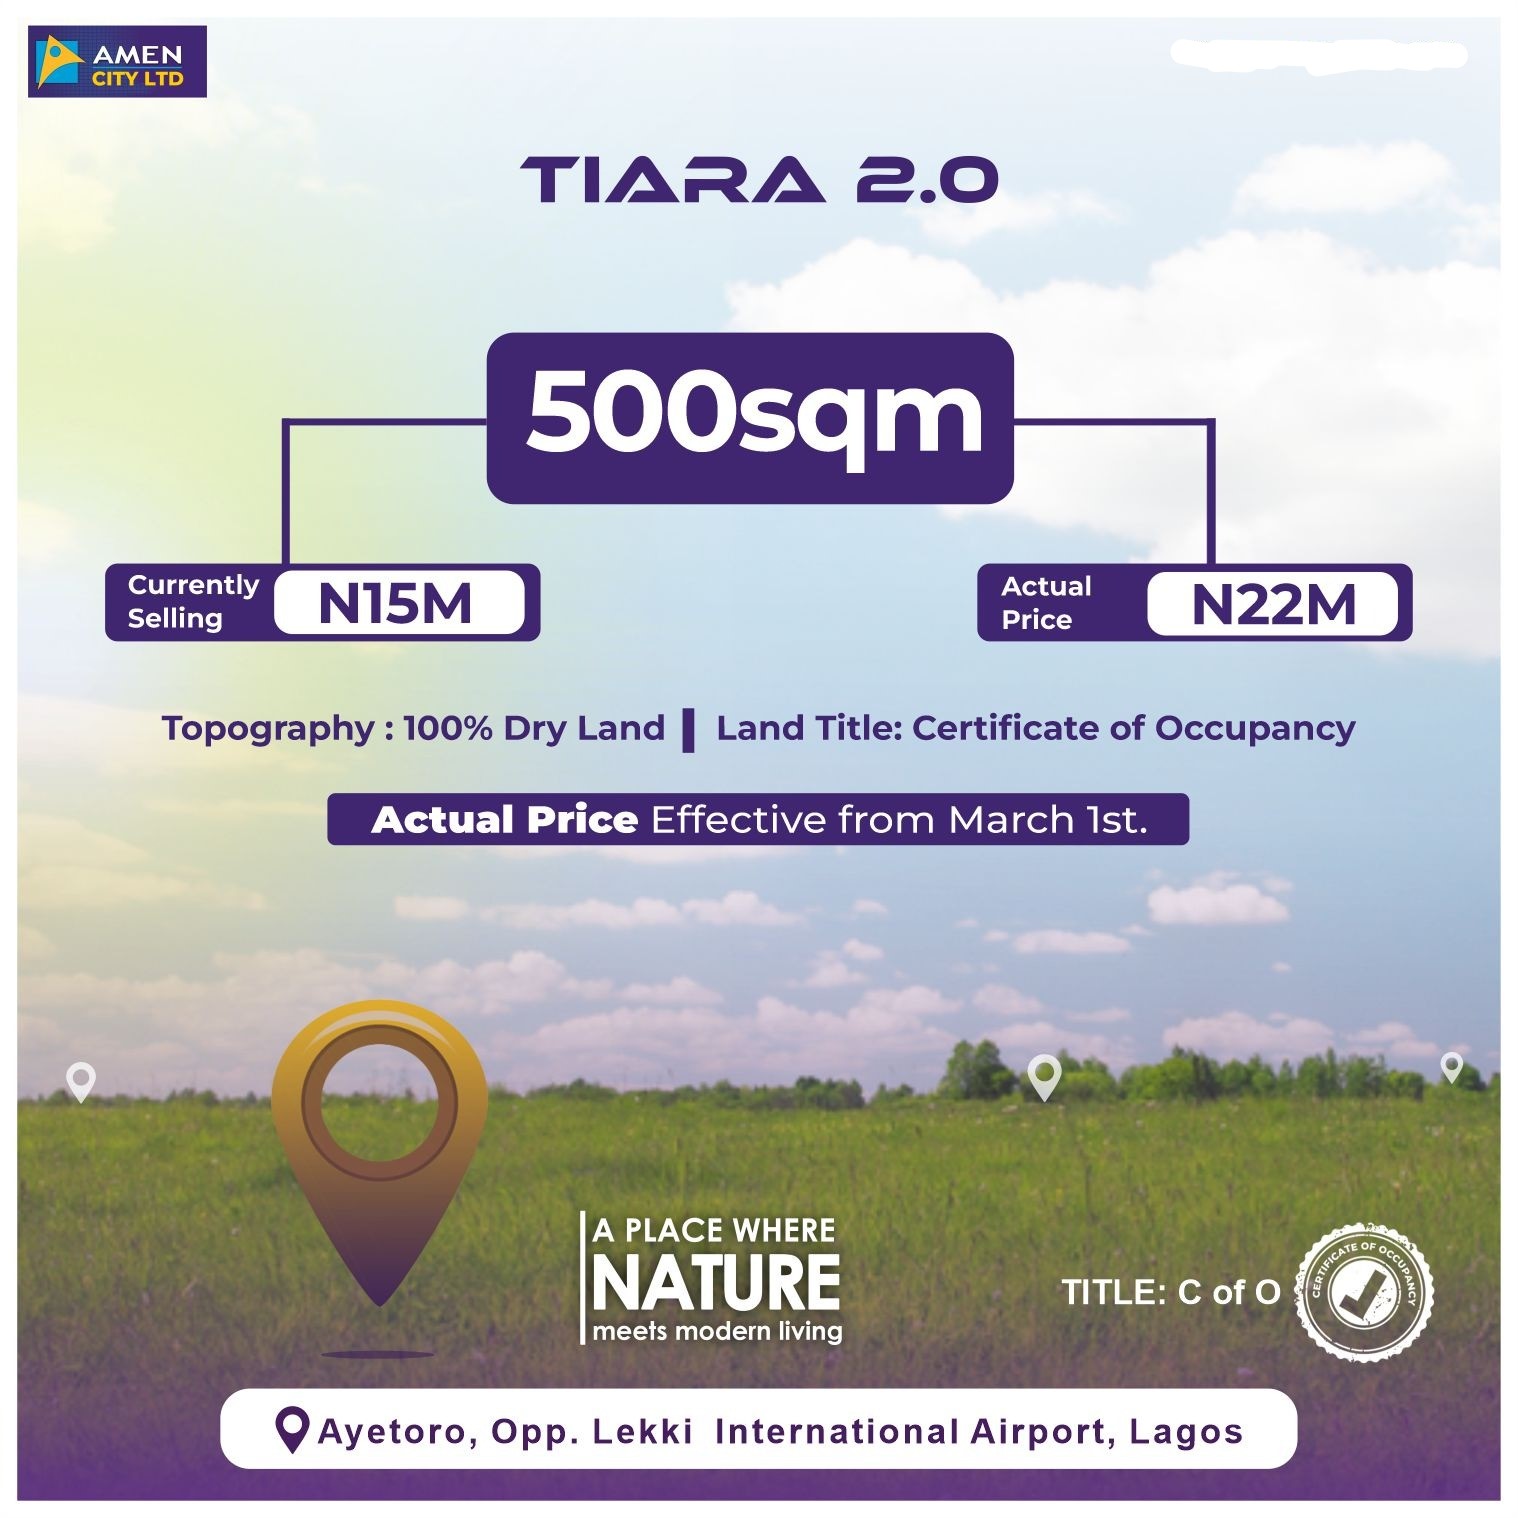 Tiara 2.0 is a luxury estate with great modern infrastructure in the Ibeju Lekki corridor, that gives you the opportunity to own a residential plot where you are free to build your own desired structure.